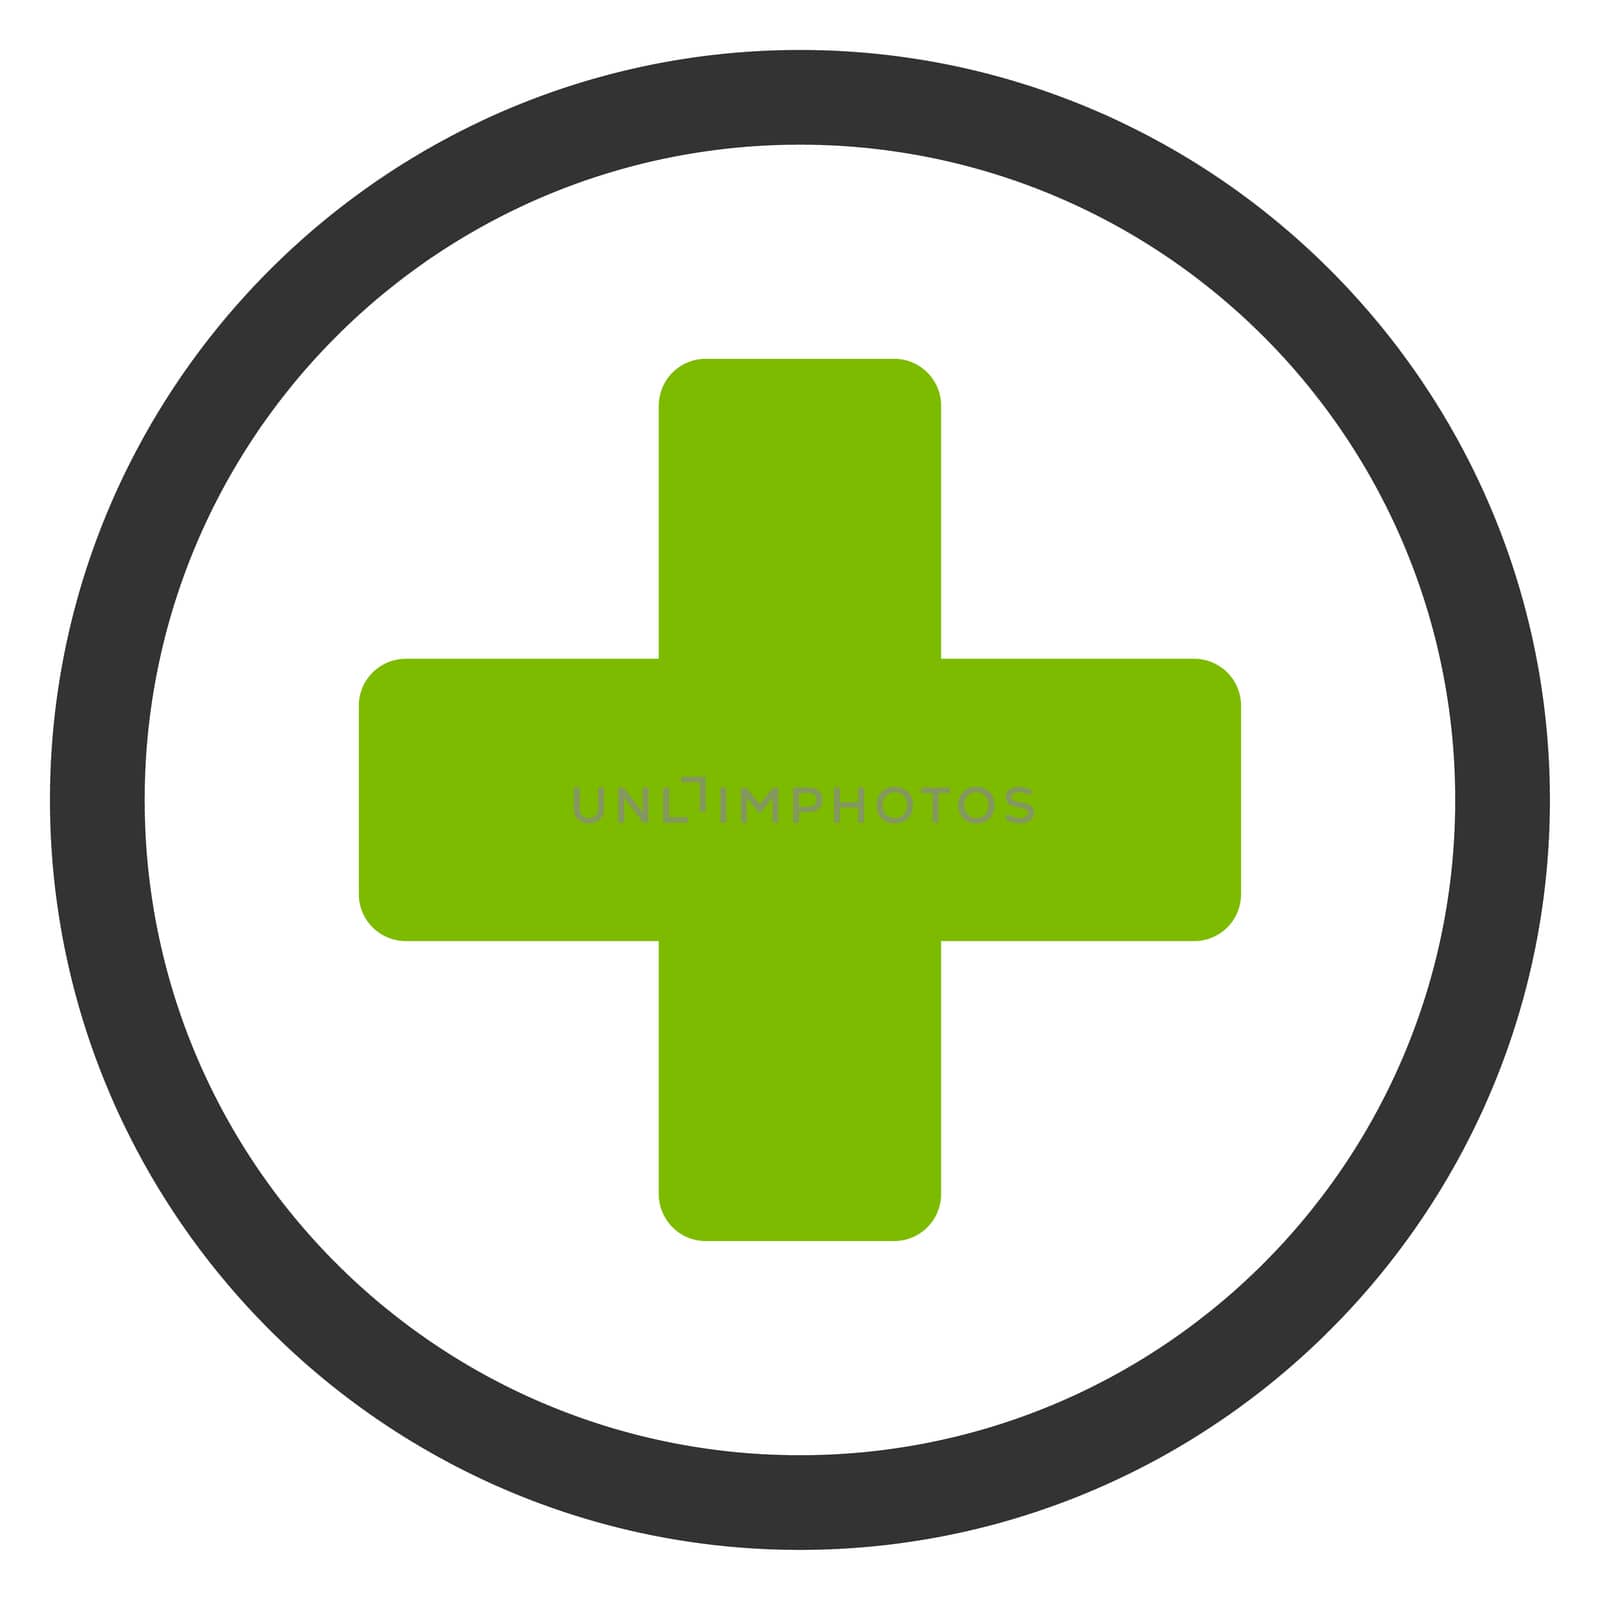 Rounded Plus raster icon. Style is bicolor flat symbol, eco green and gray colors, rounded angles, white background.